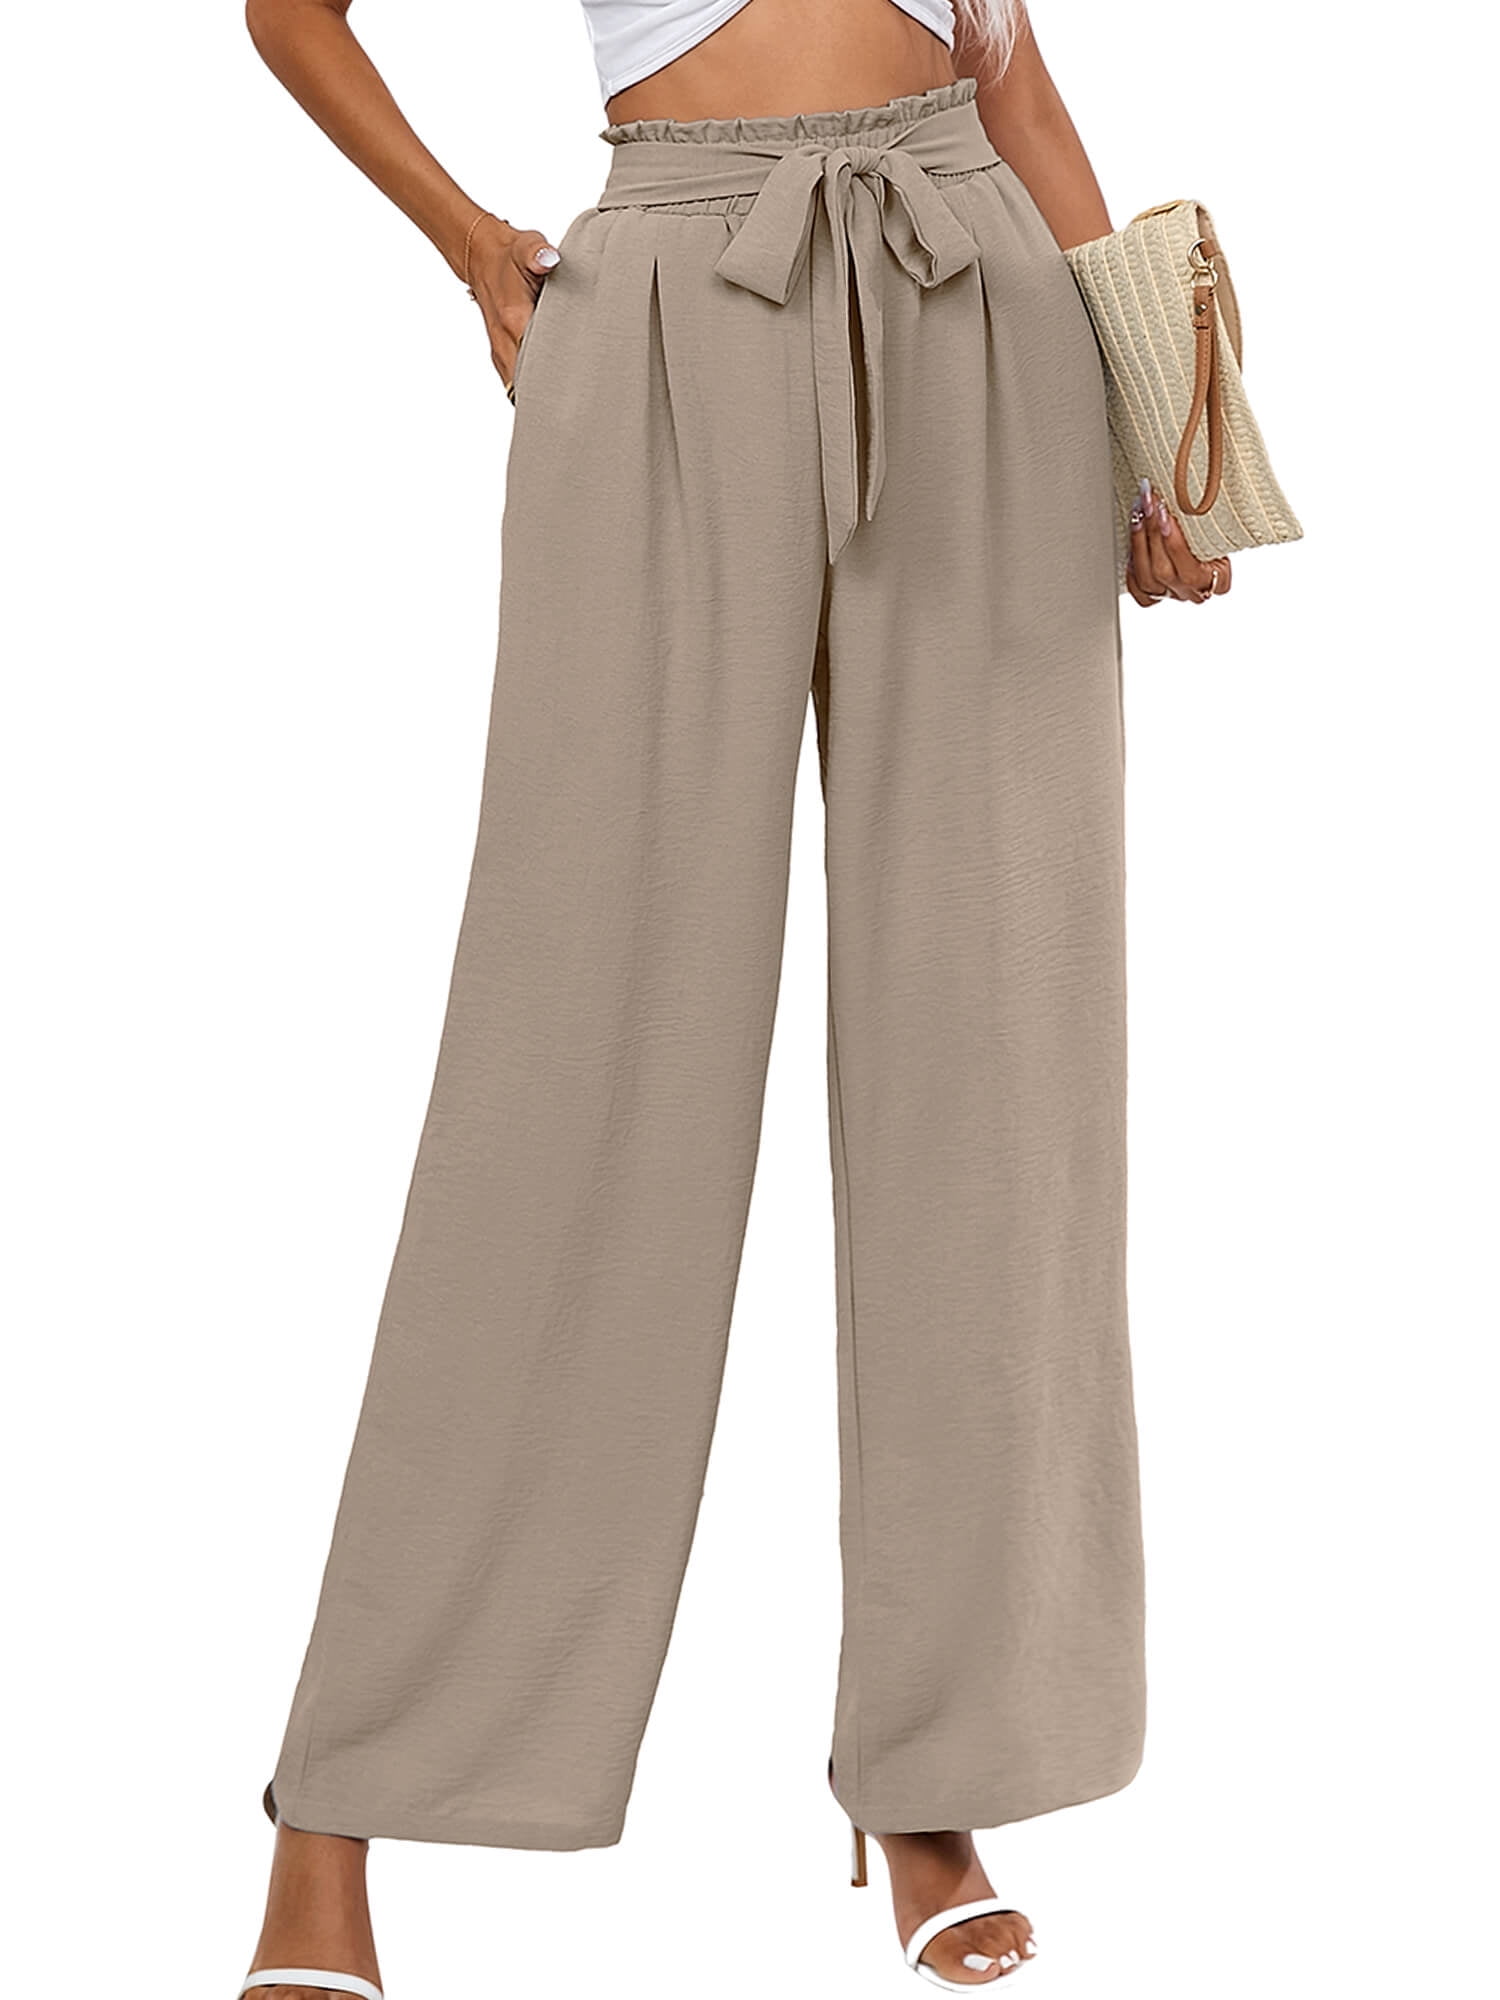 Woman's Casual Full-Length Loose Pants Drape Loos Straight Trouser Solid |  eBay